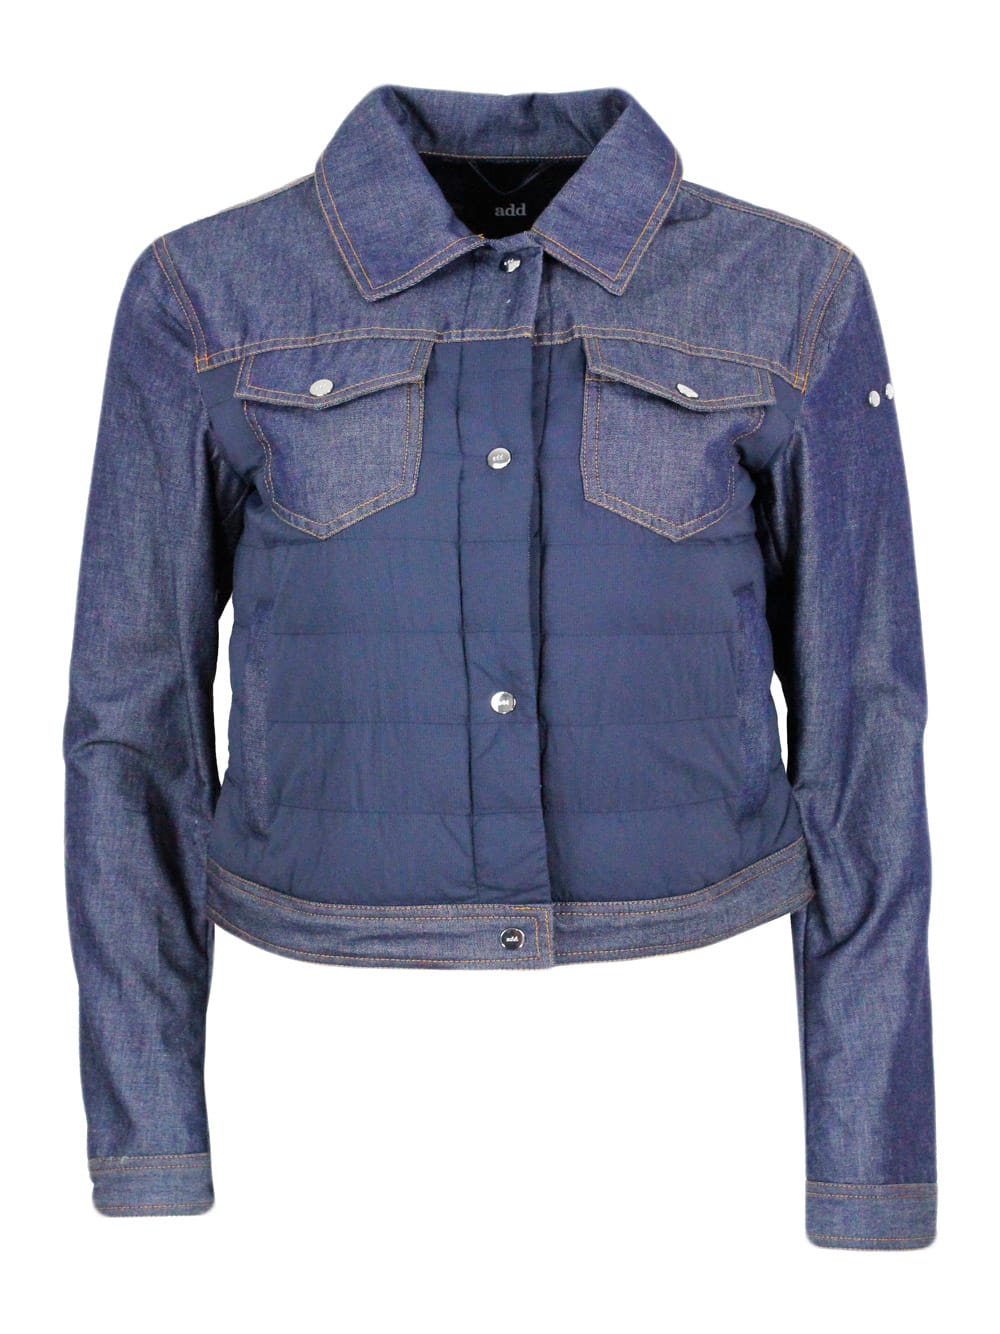 Jacket In Soft Denim With Lightly Padded Technical Fabric Parts And Zip Closure.